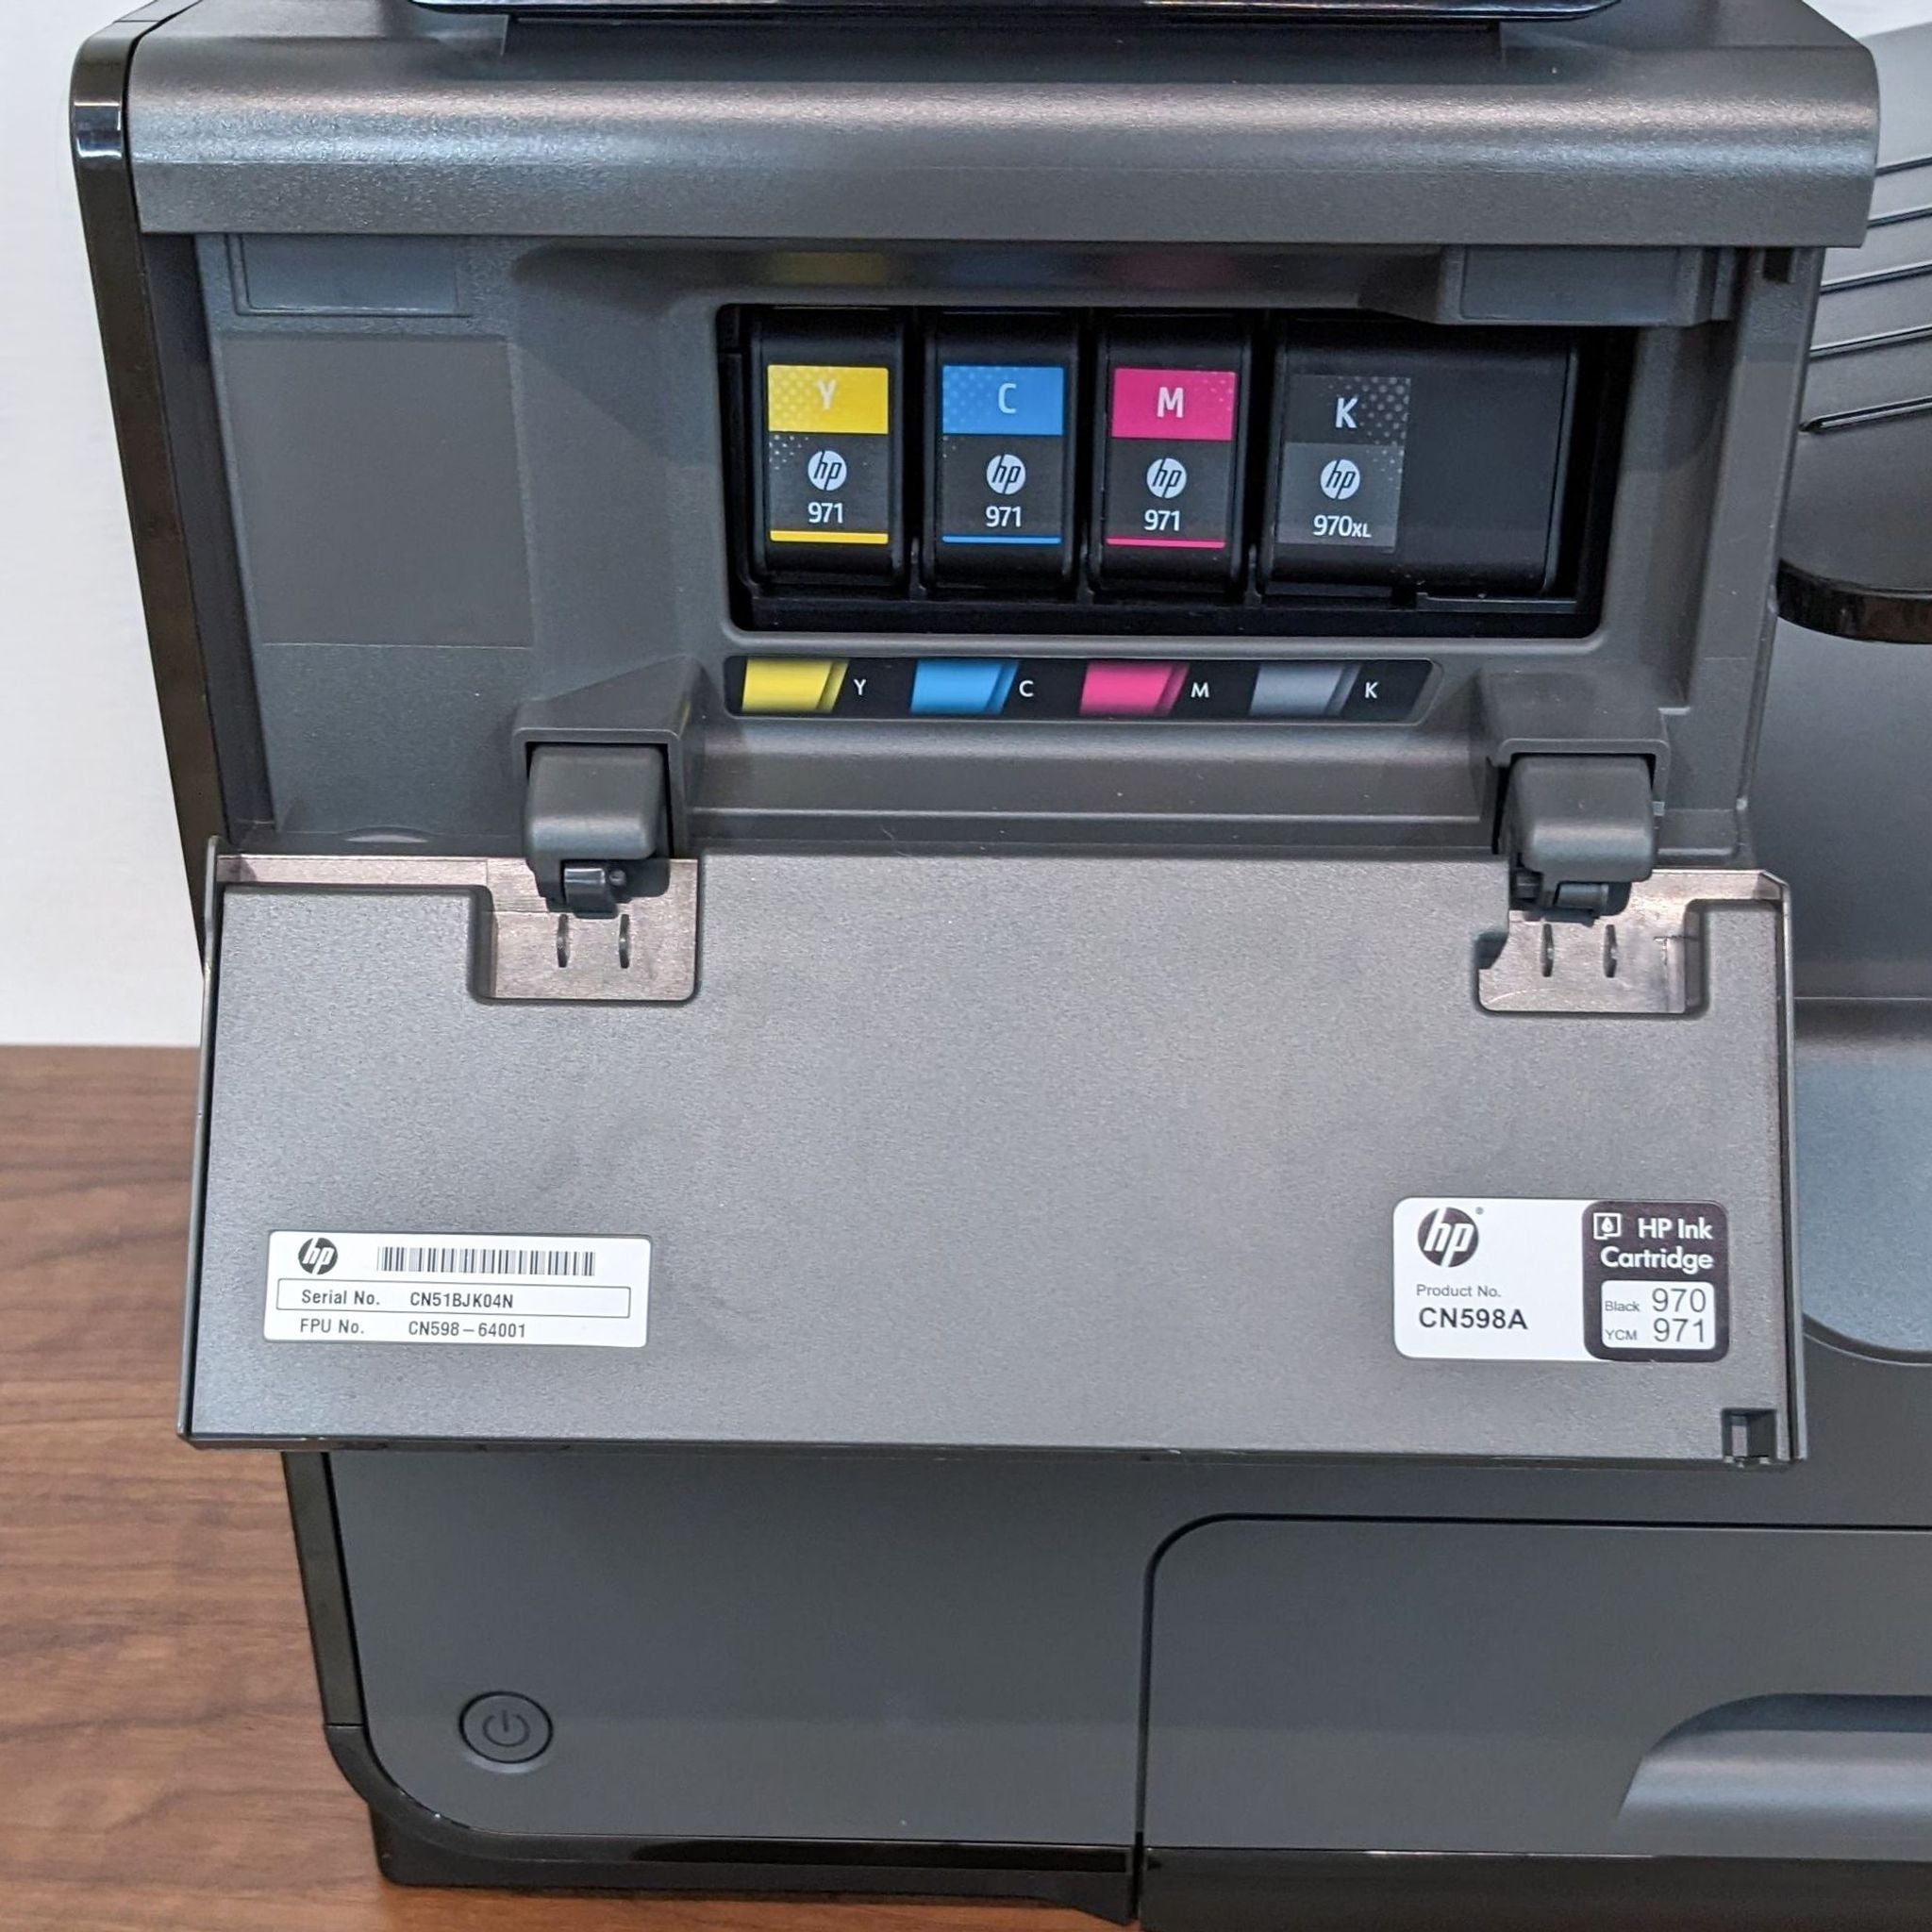 Close-up of HP OfficeJet Pro's ink cartridge compartment with CMYK cartridges installed and model details visible.